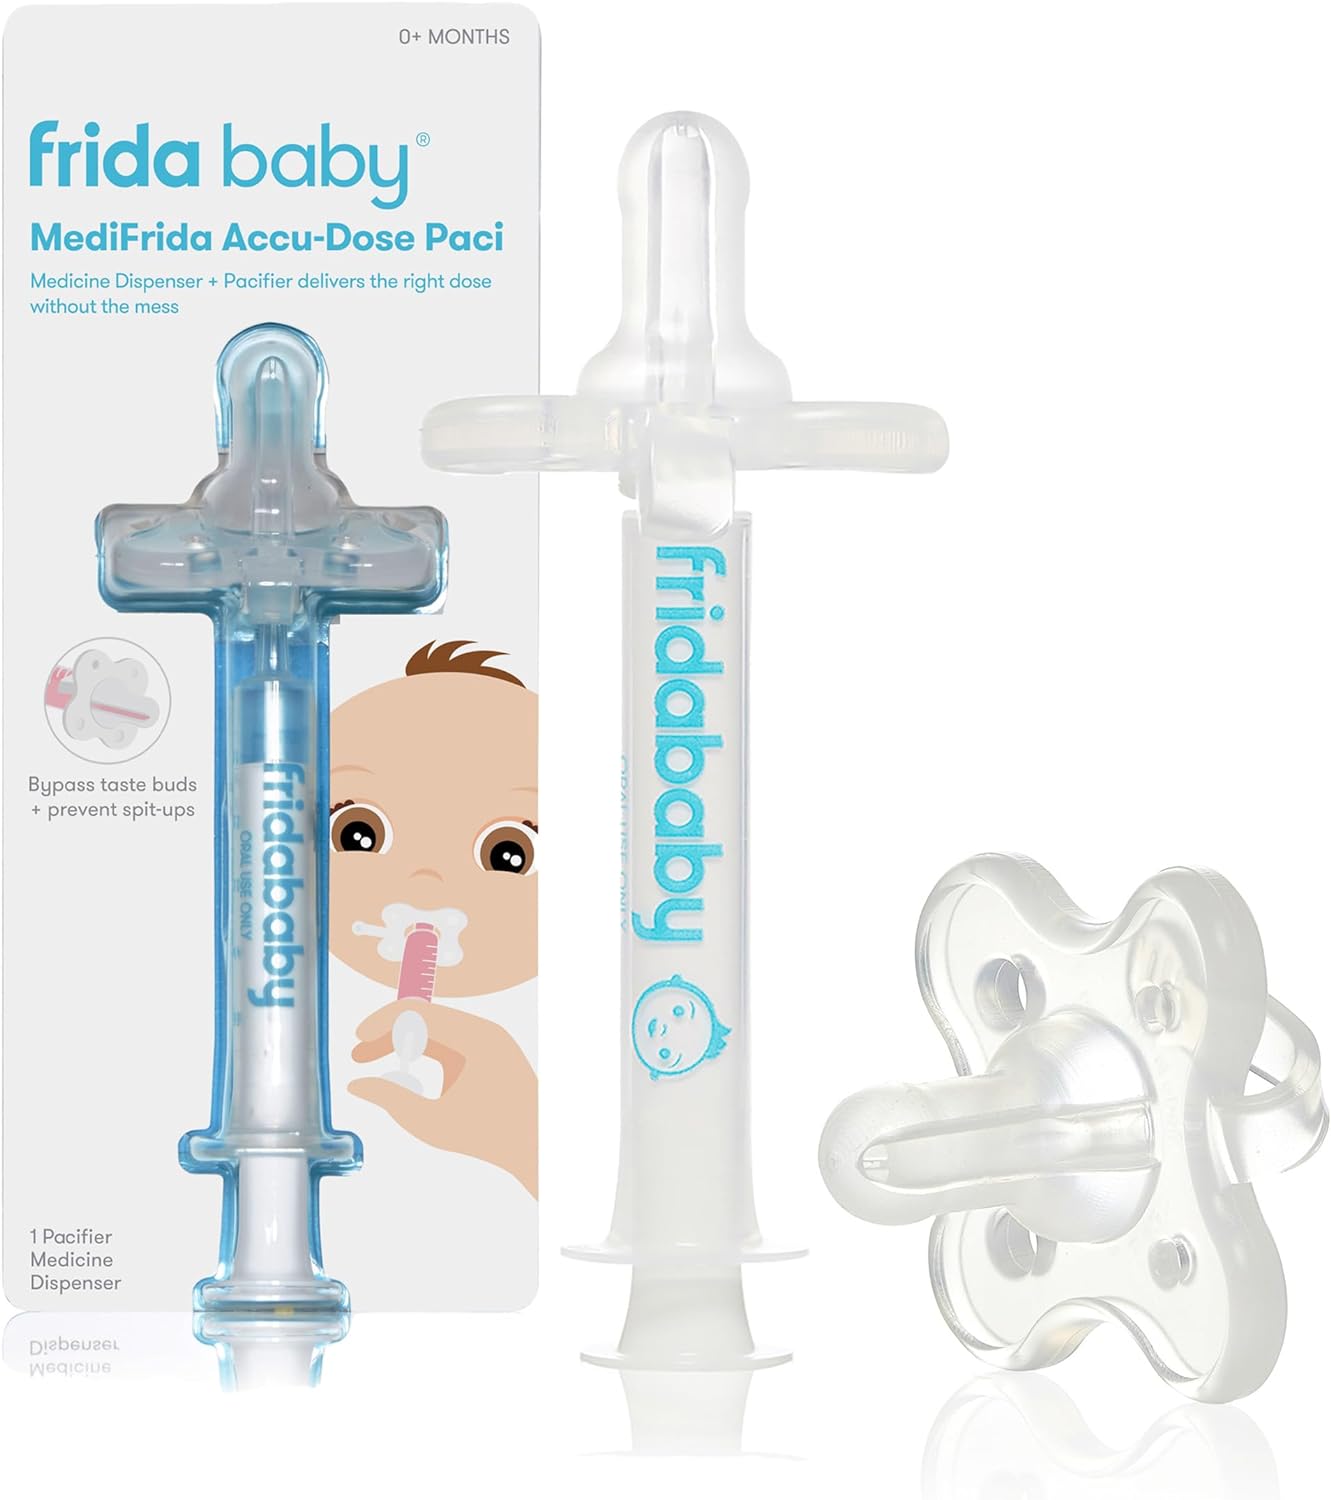 Fridababy - MediFrida The Accu-Dose Pacifier